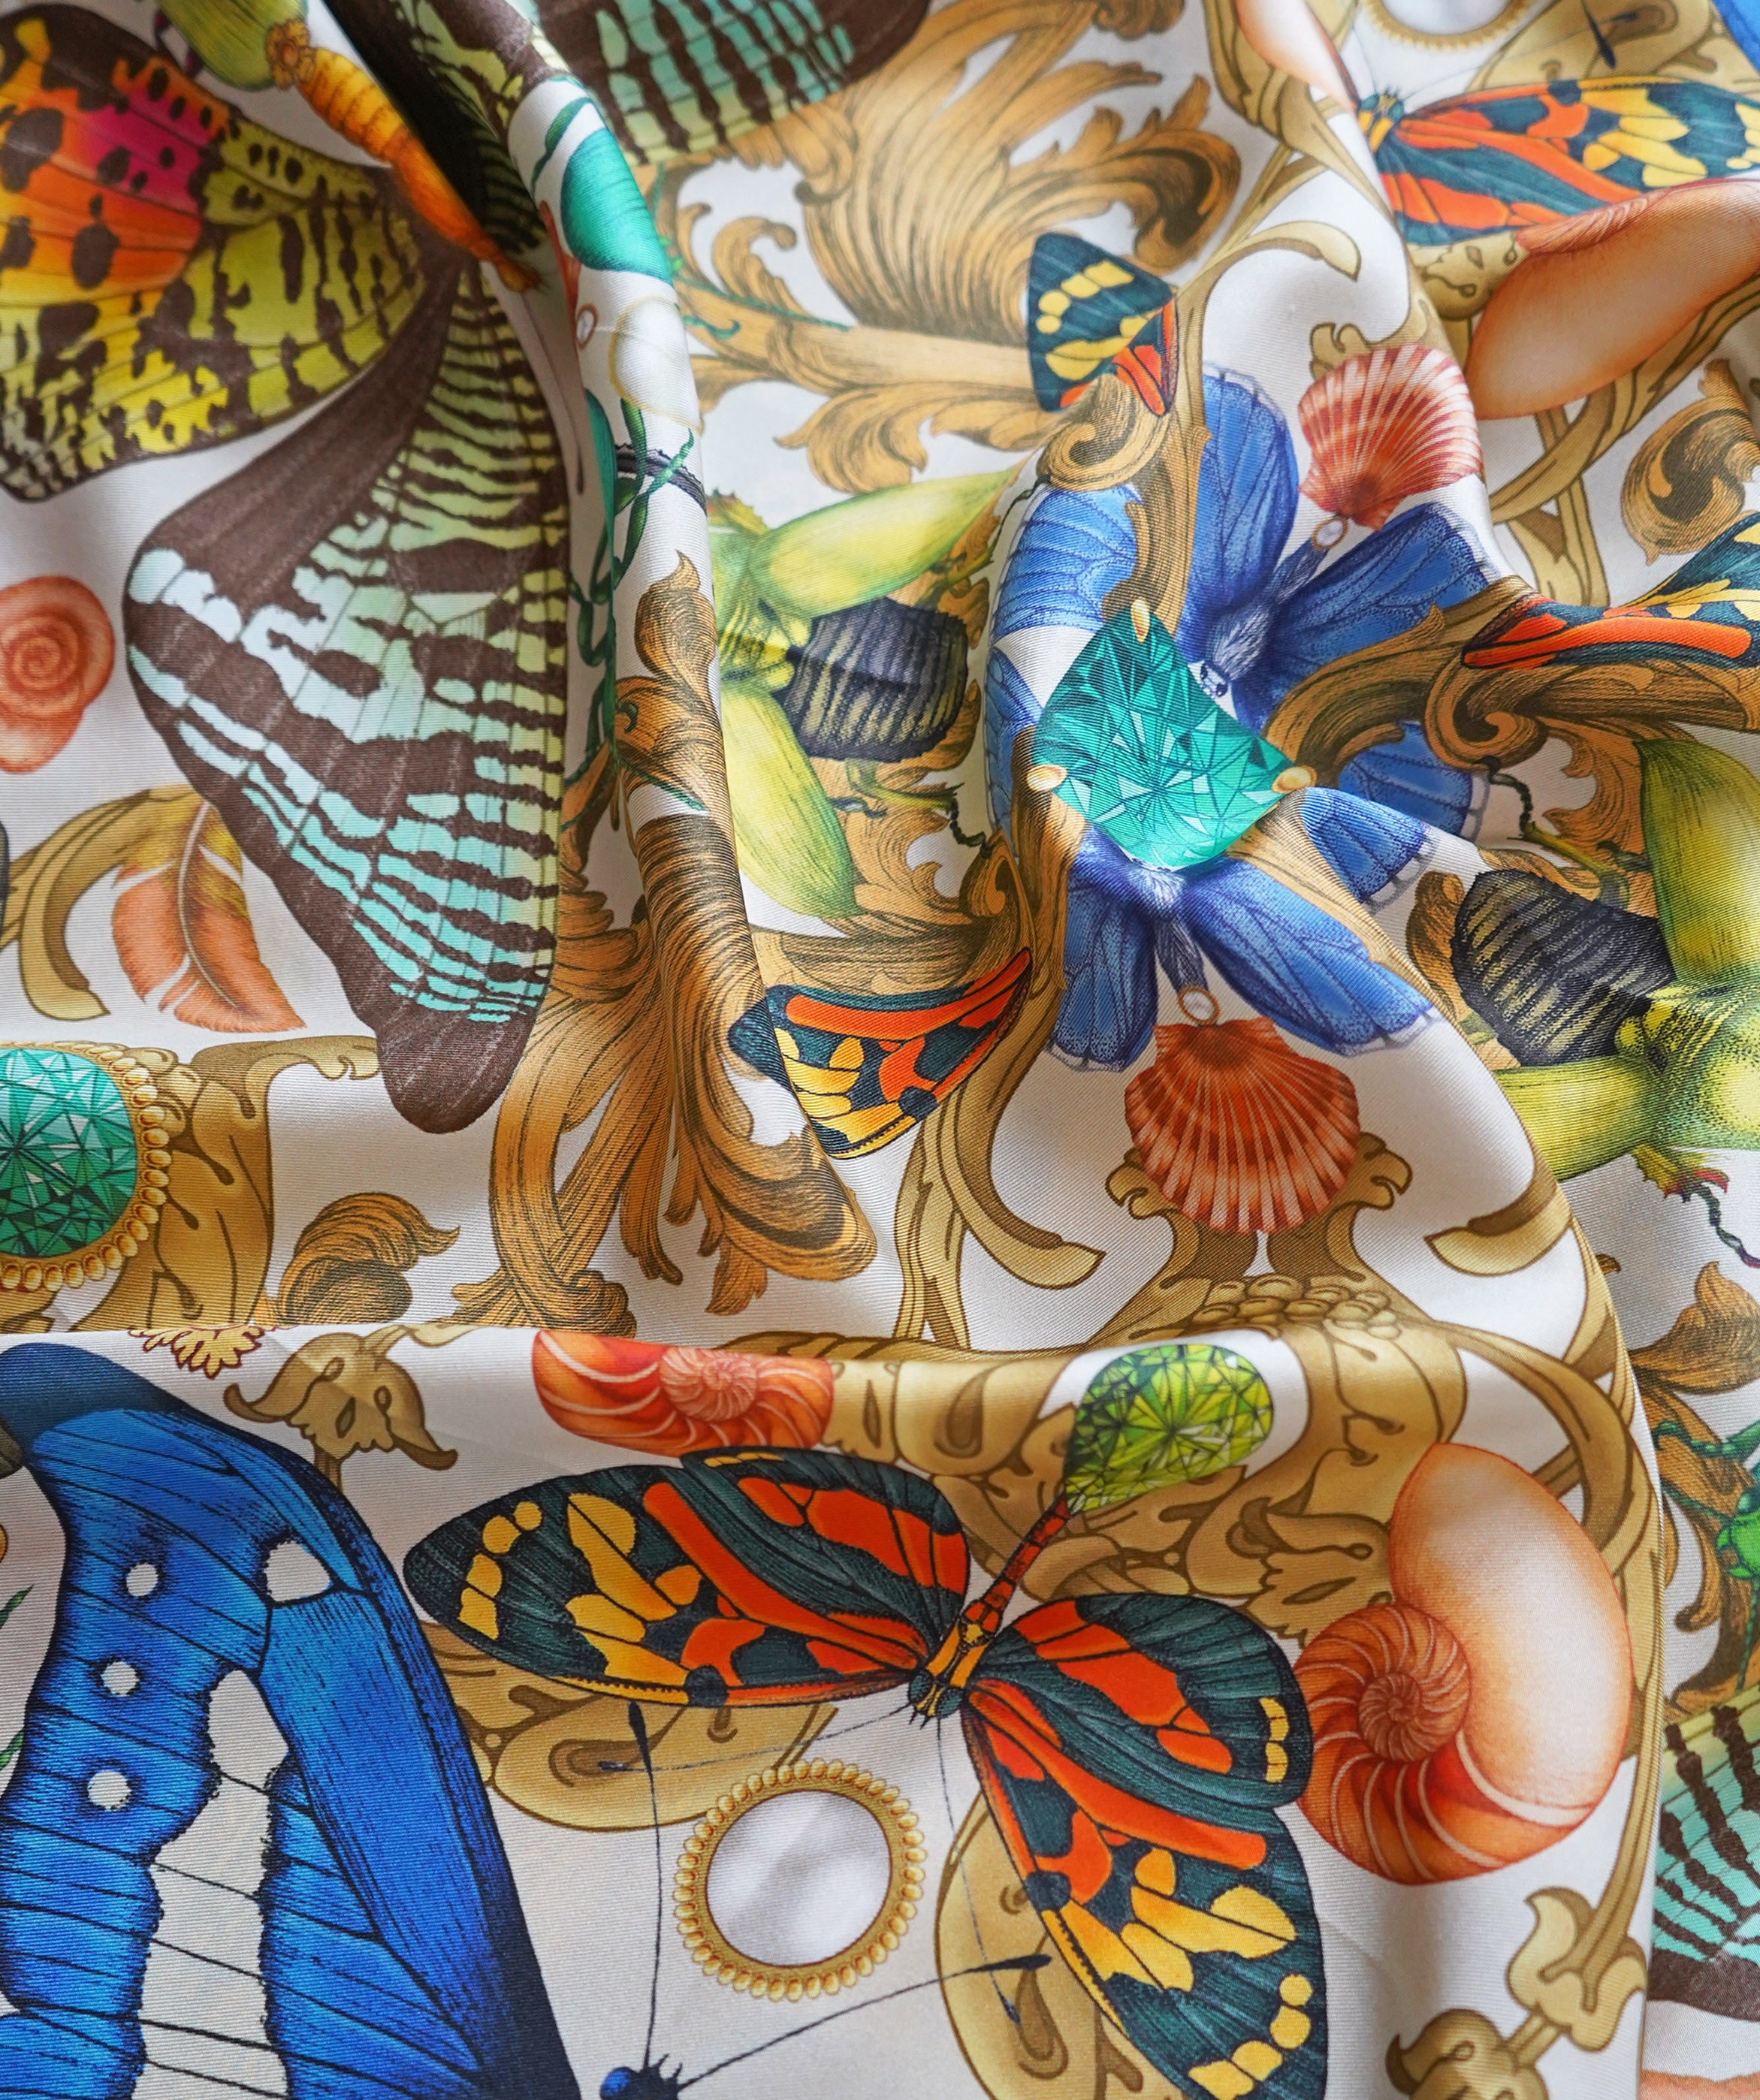 The Baroque Butterfly Scarf | 65x65cm [Preorder]